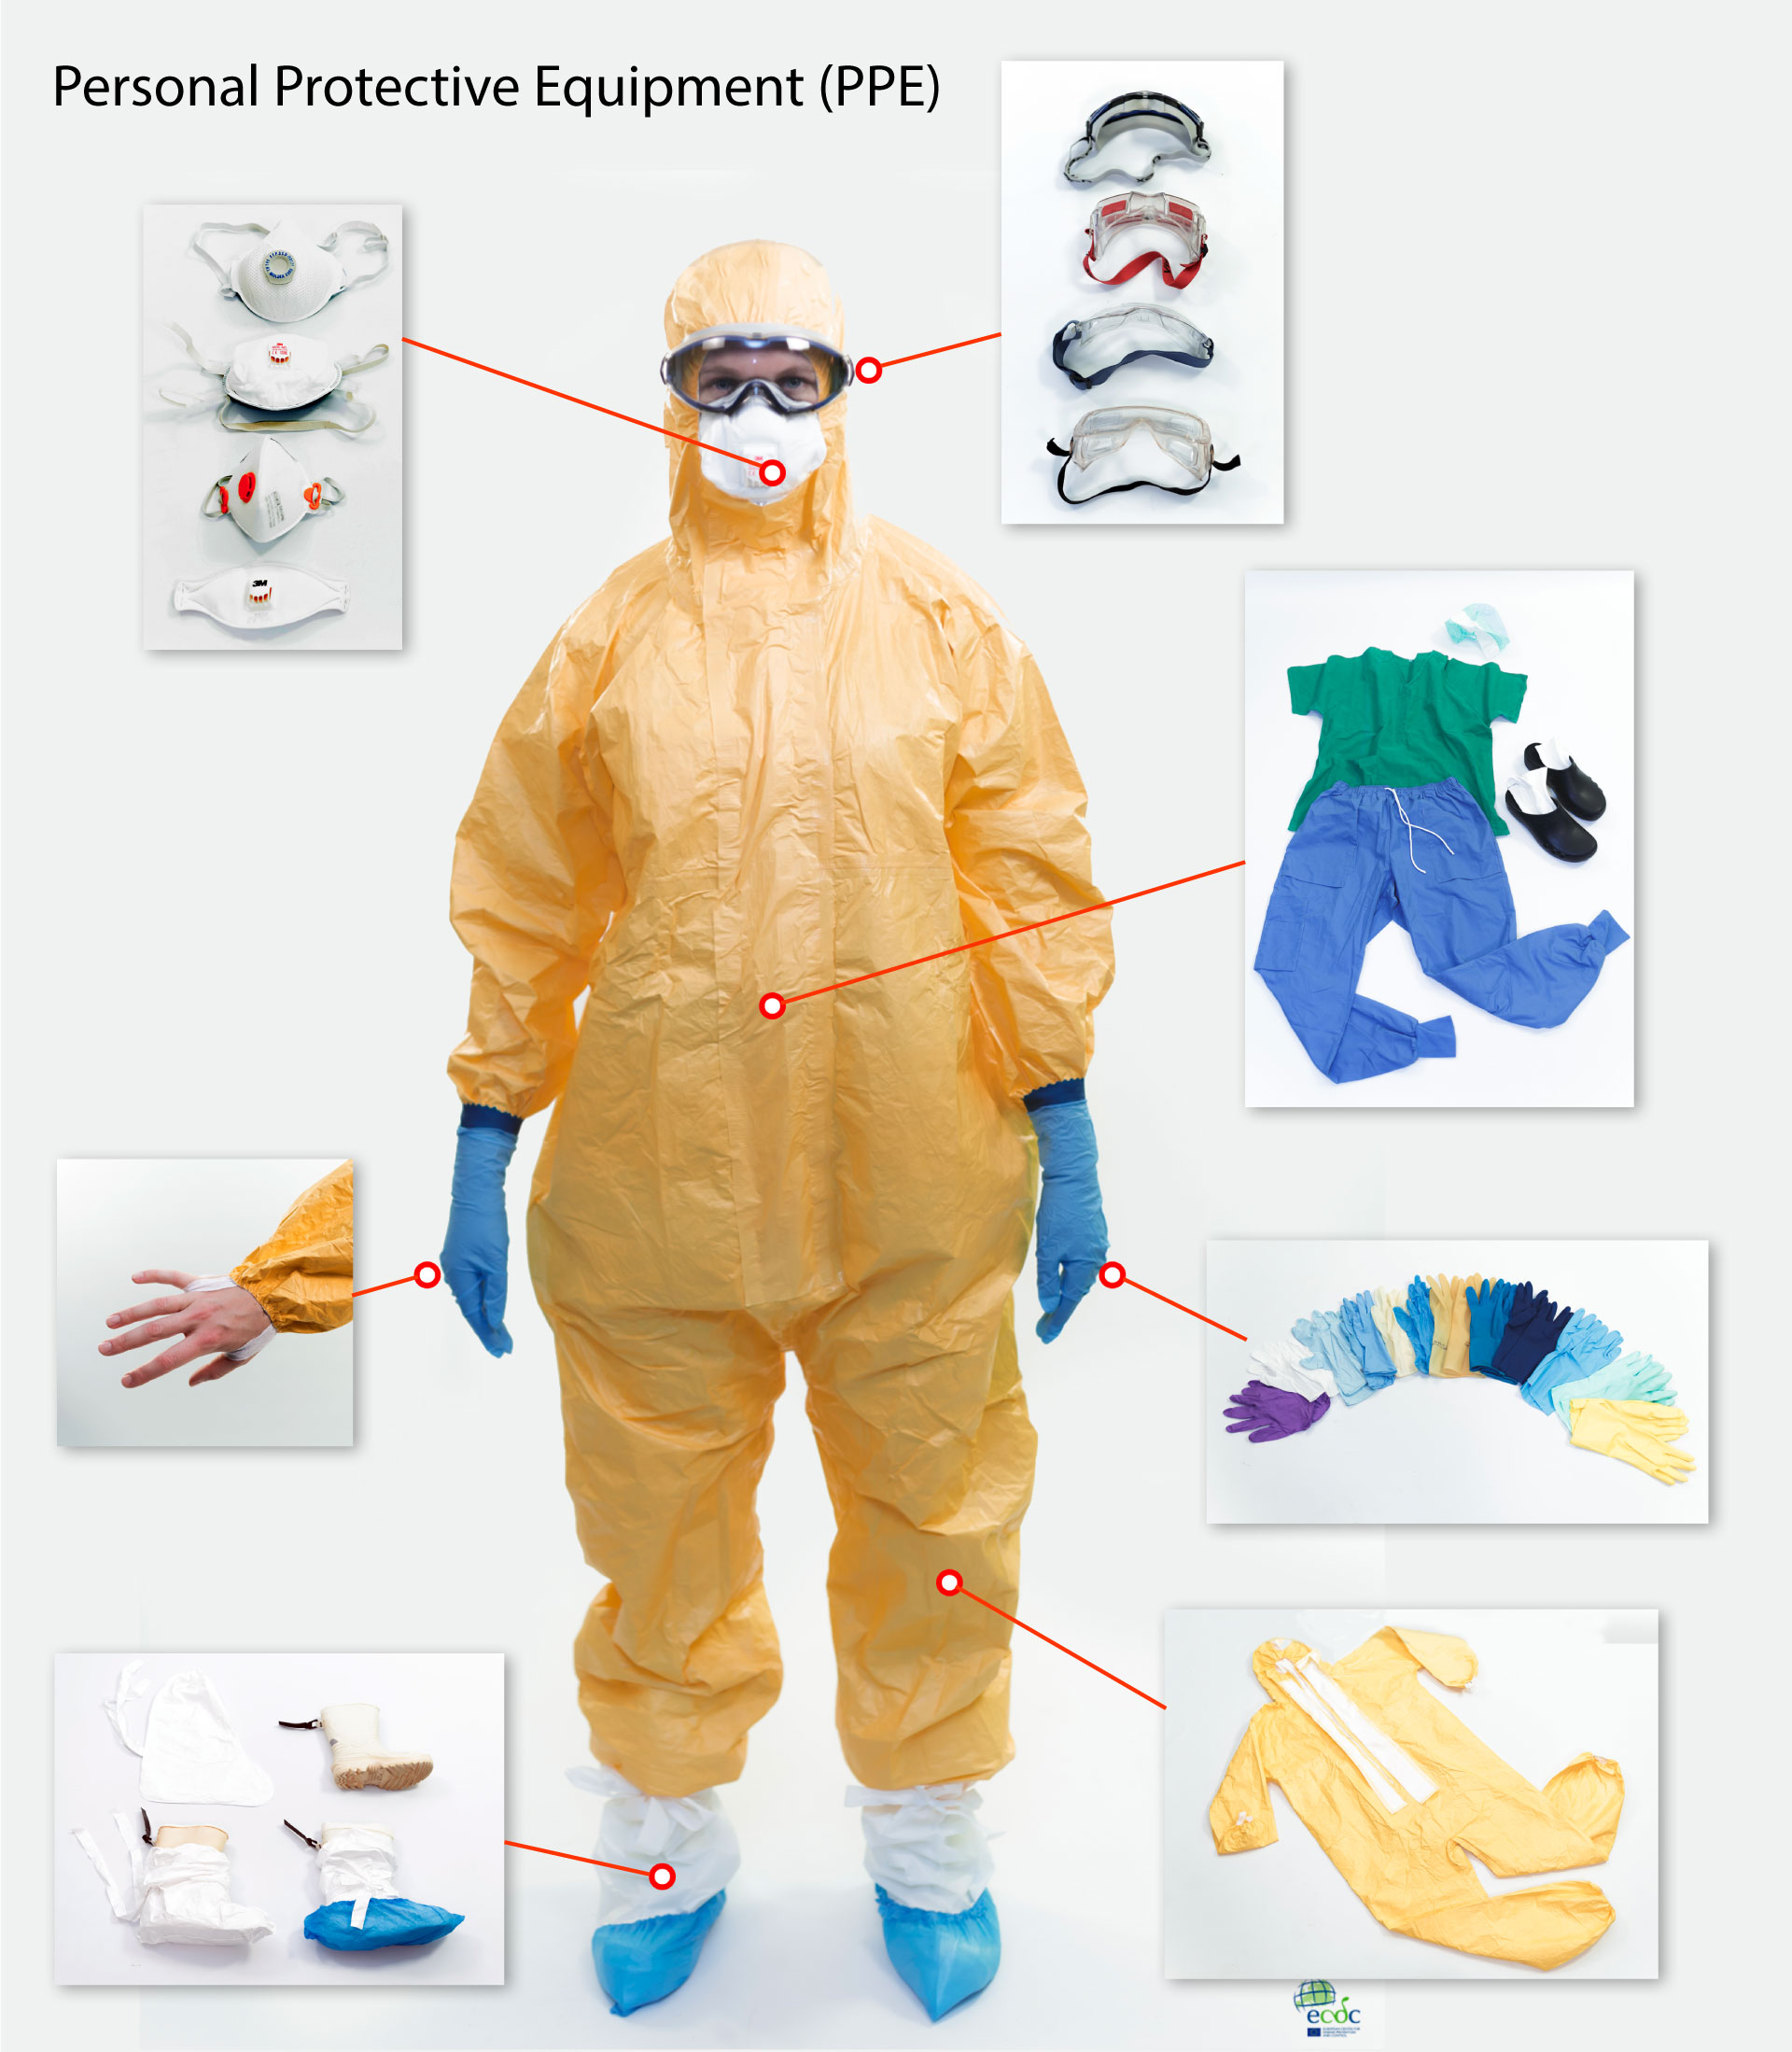 face mask, ppe, fashion, personal protection equipment